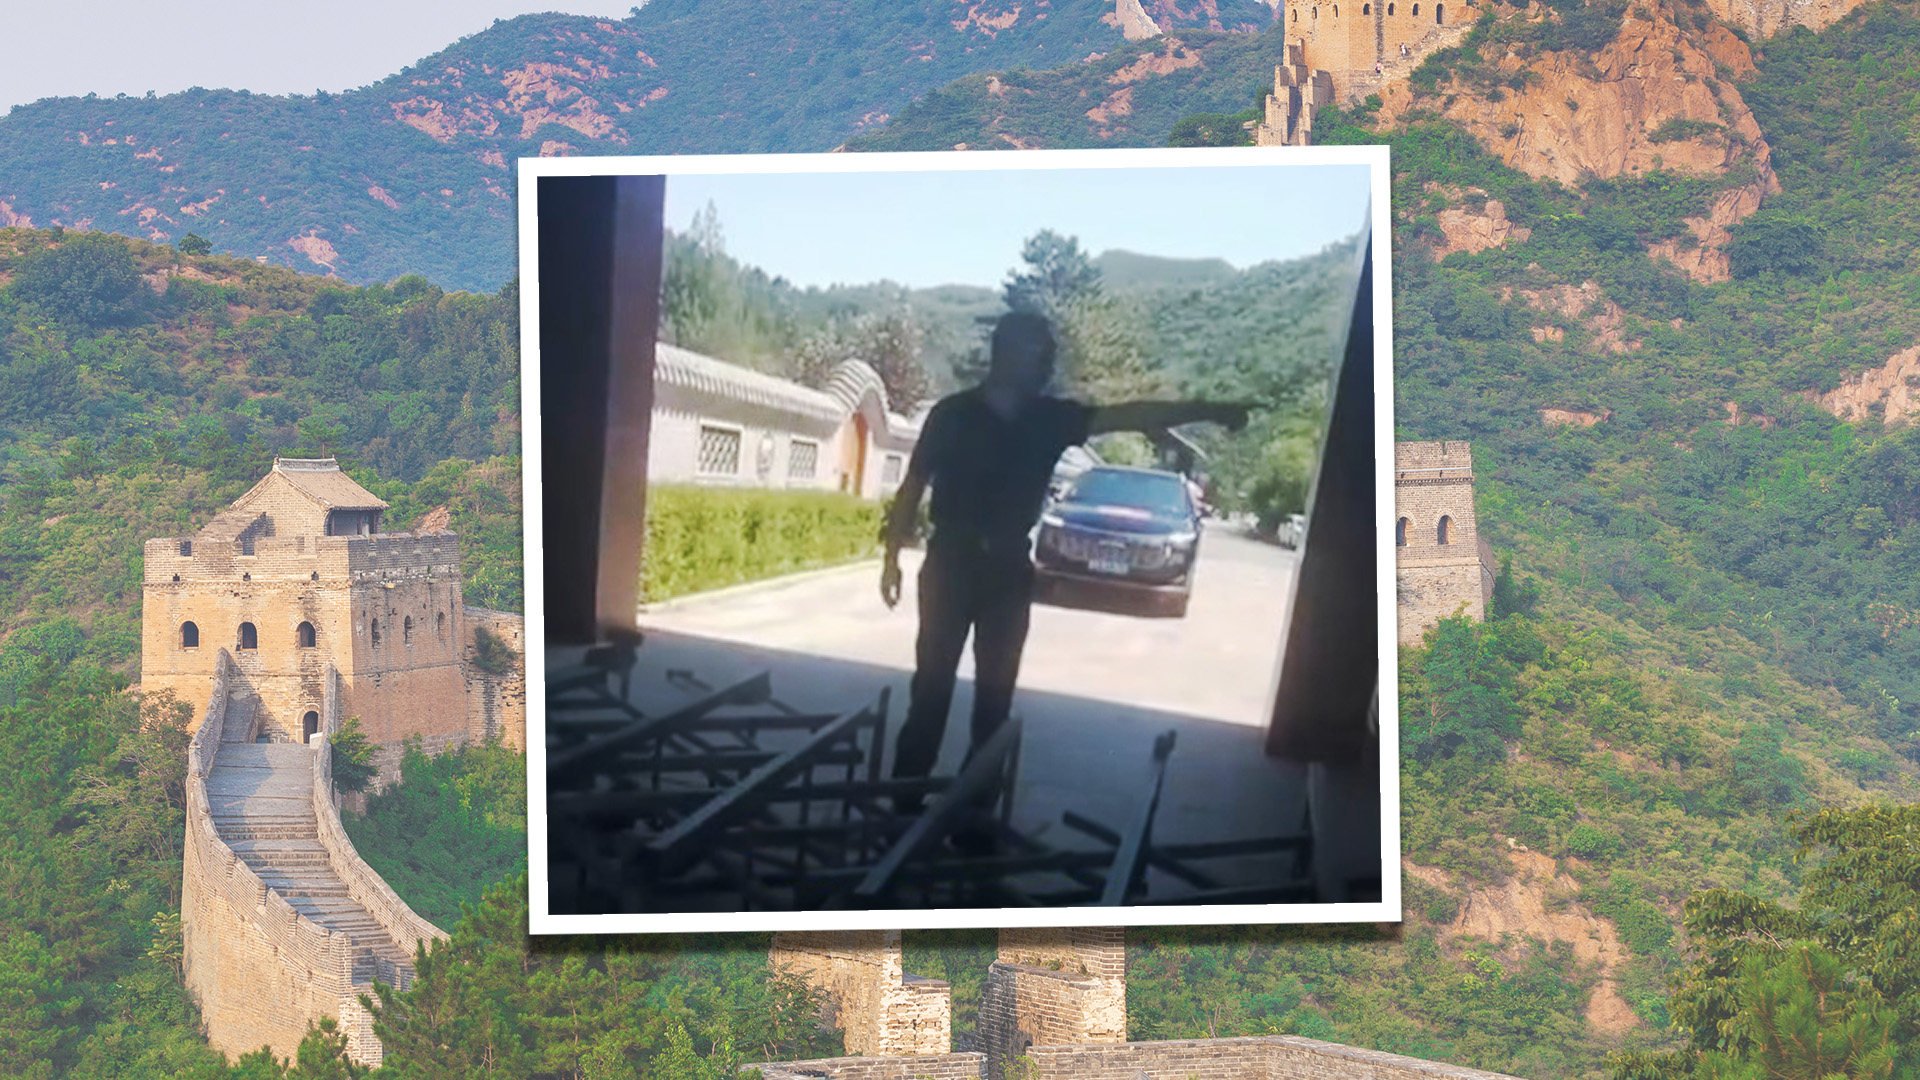 Online observers have aimed criticism at a senior executive of a state-owned company that manages a section of China’s Great Wall over accusations that he displayed “unacceptable behaviour” during a row with guards at a resort north of the capital, Beijing. Photo: SCMP composite/Douyin